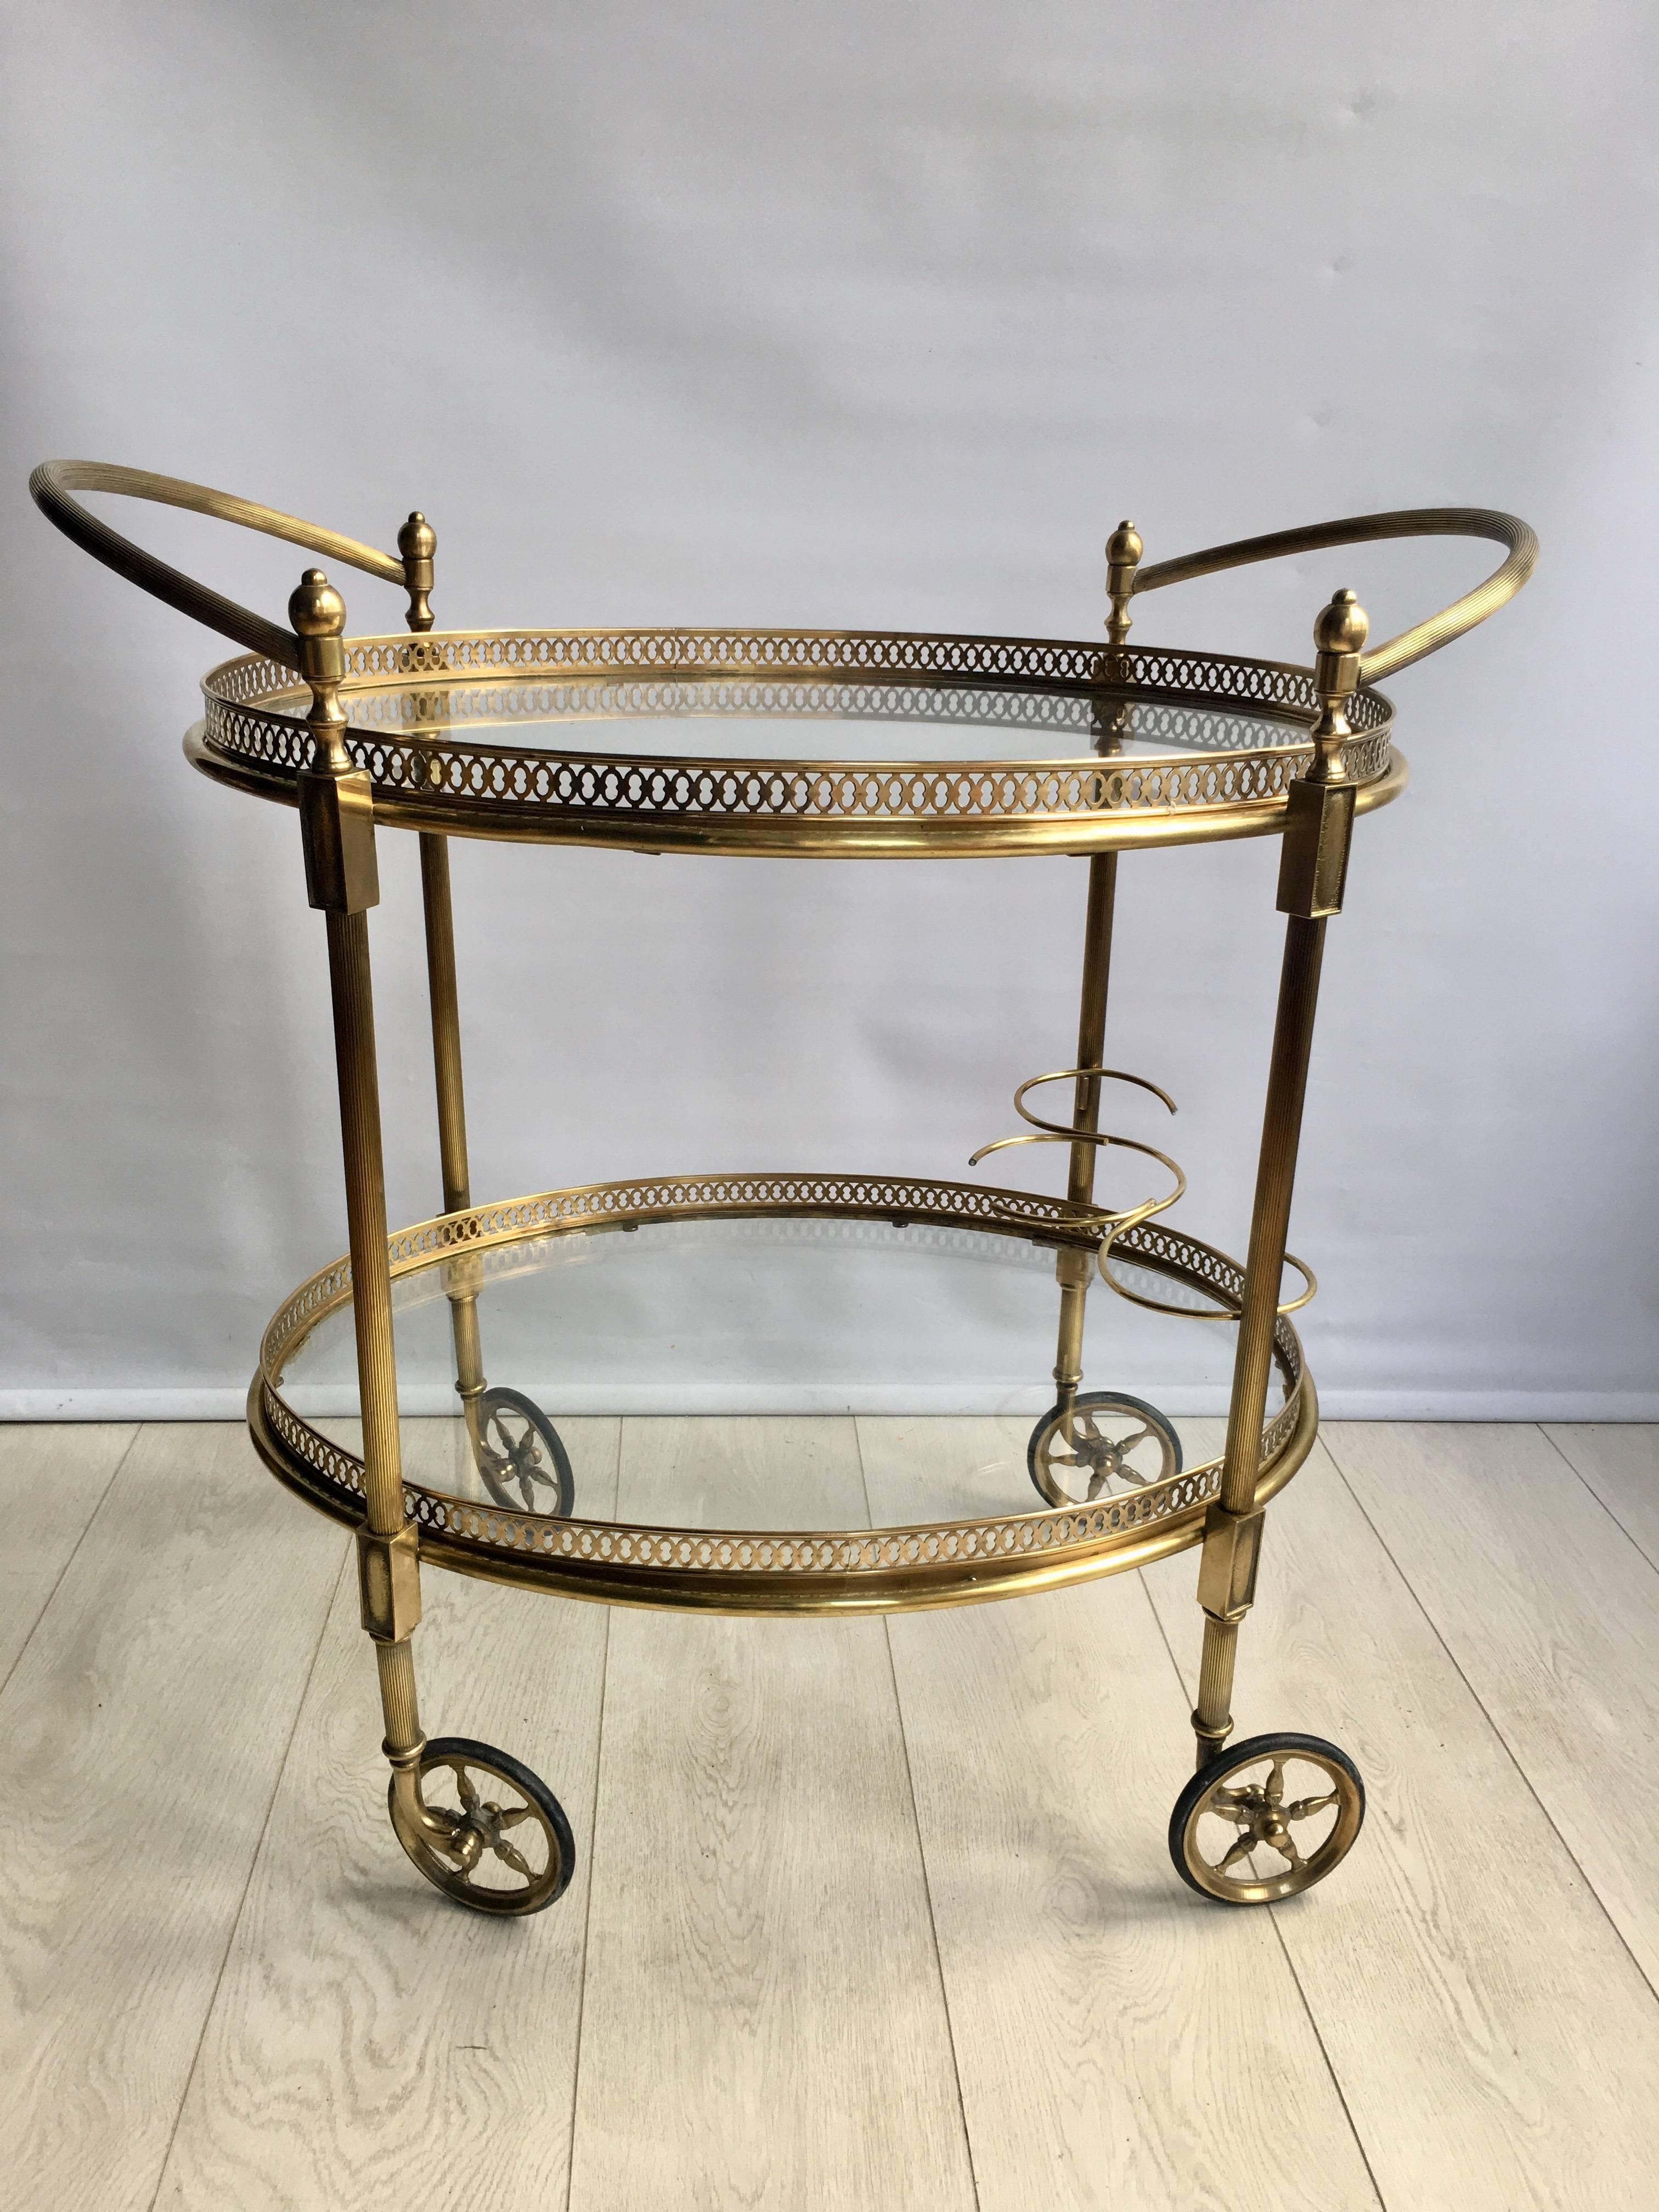 A large oval drink trolley from France, circa 1950

Polished brass frame with decorative handles

The top tray measures 62.5cm wide by 46cm deep and stands 63.5cm to the glass.
Overall dimensions including the handles takes it to 76cm wide,